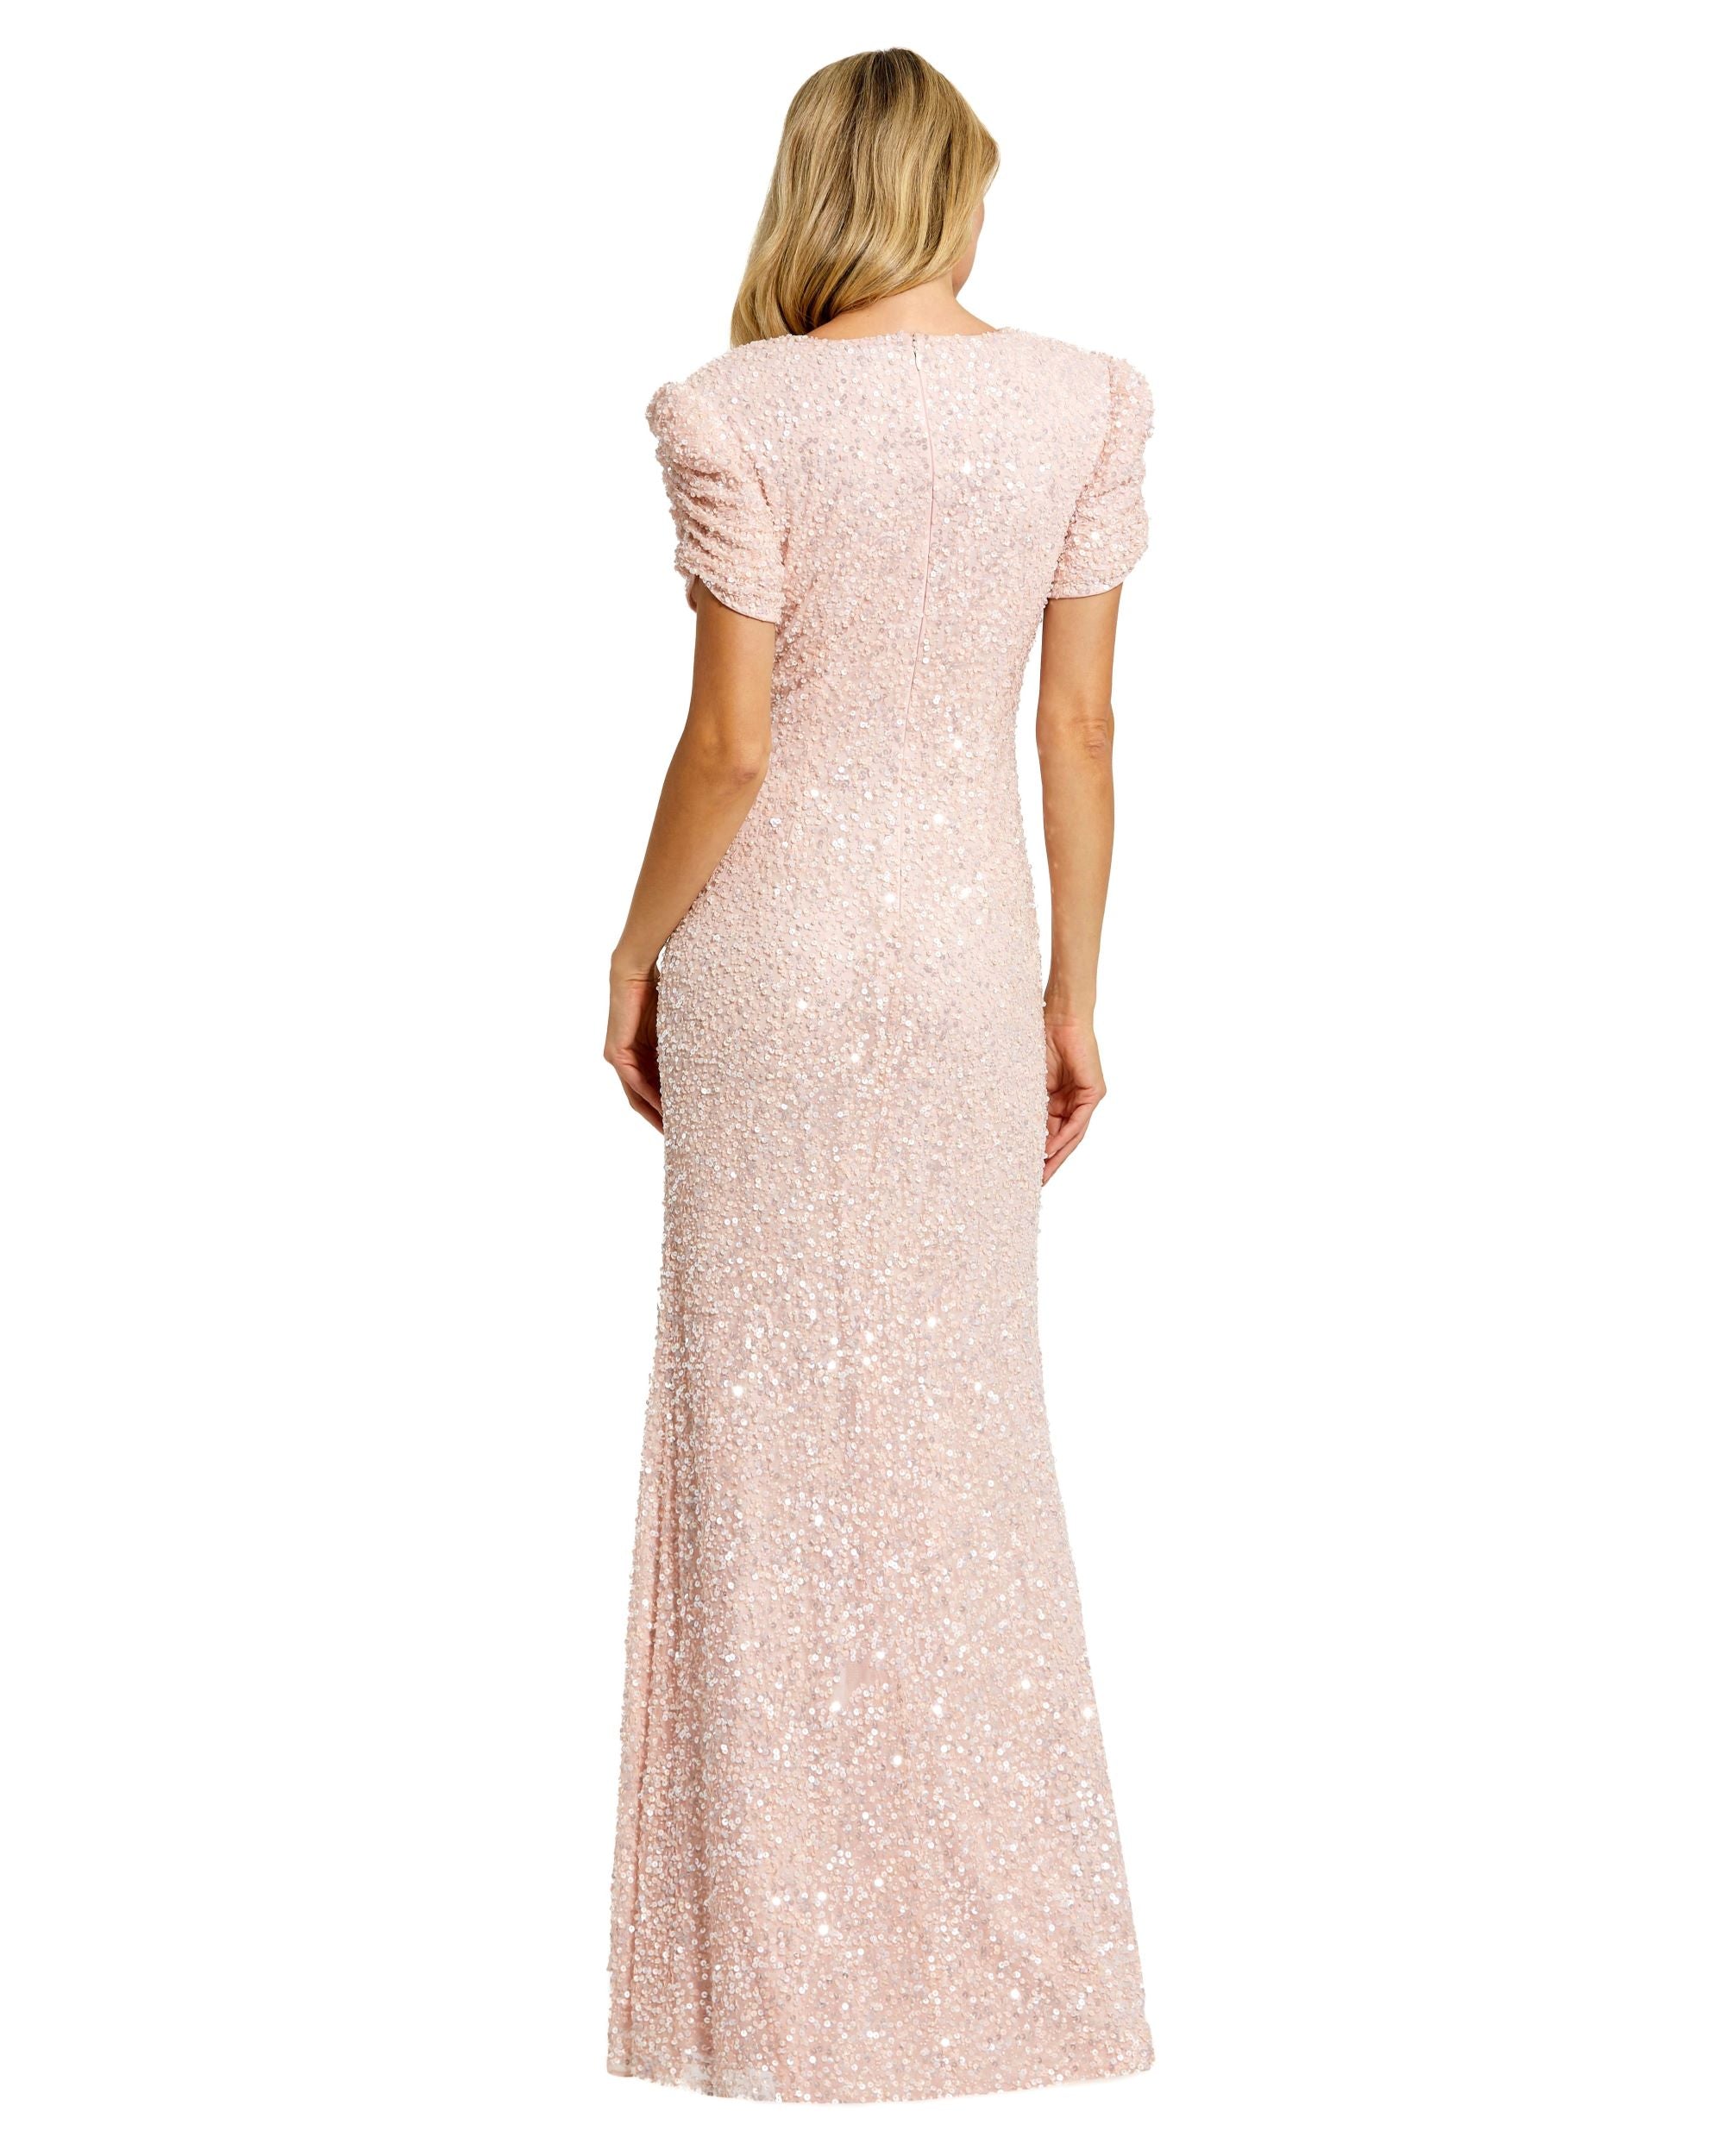 Gathered Short Sleeve Beaded Gown